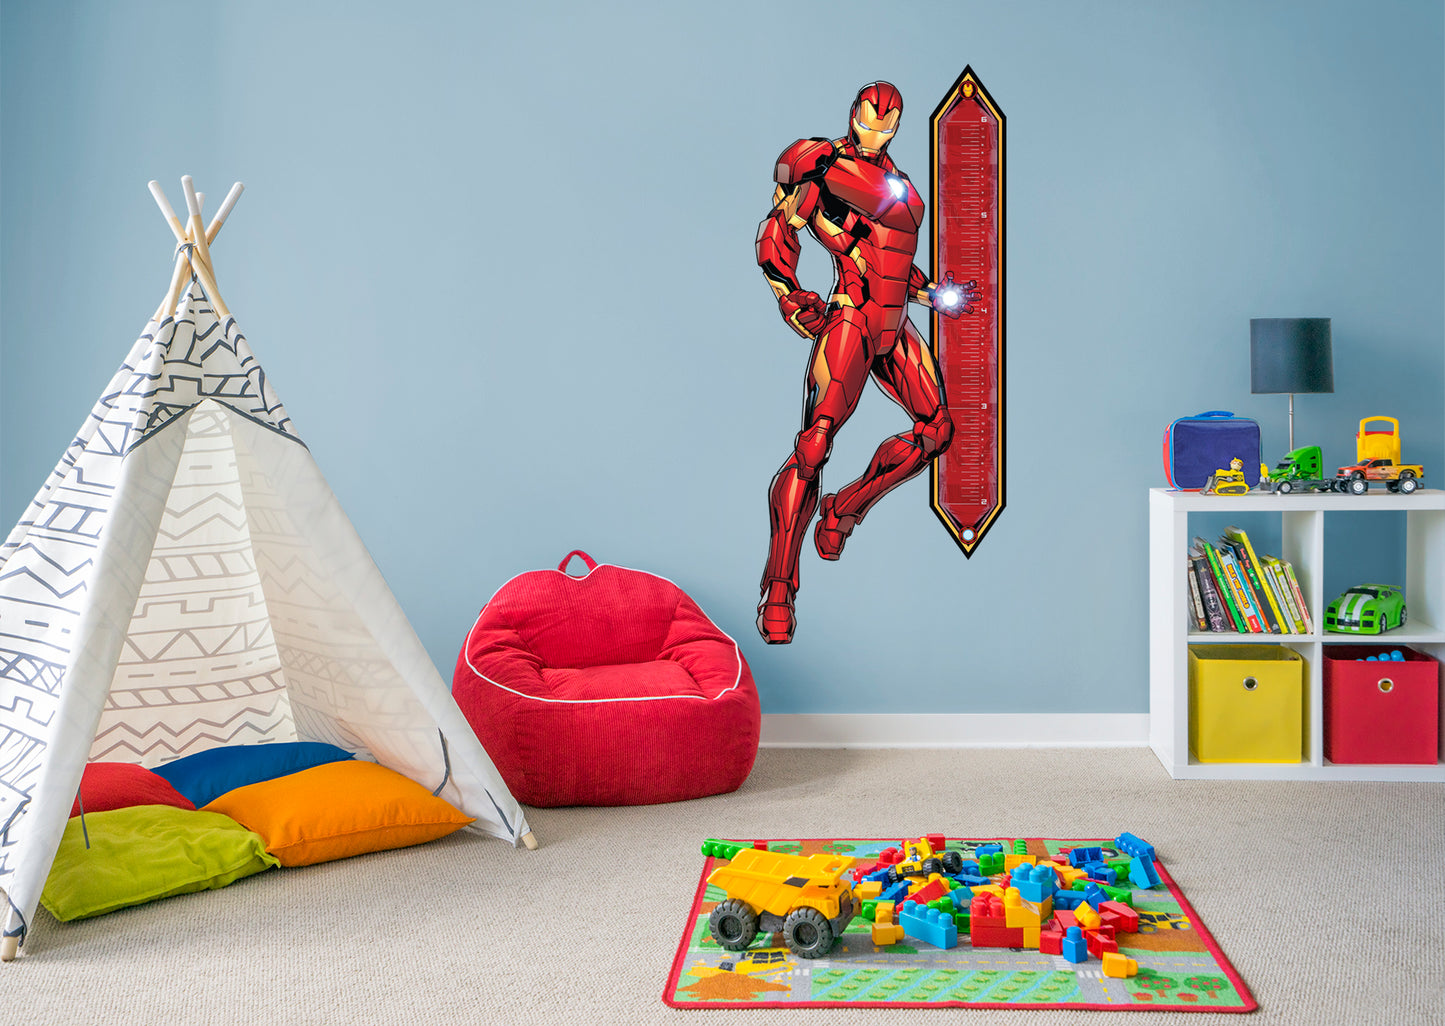 Iron Man Growth Chart  - Officially Licensed Marvel Removable Wall Decal